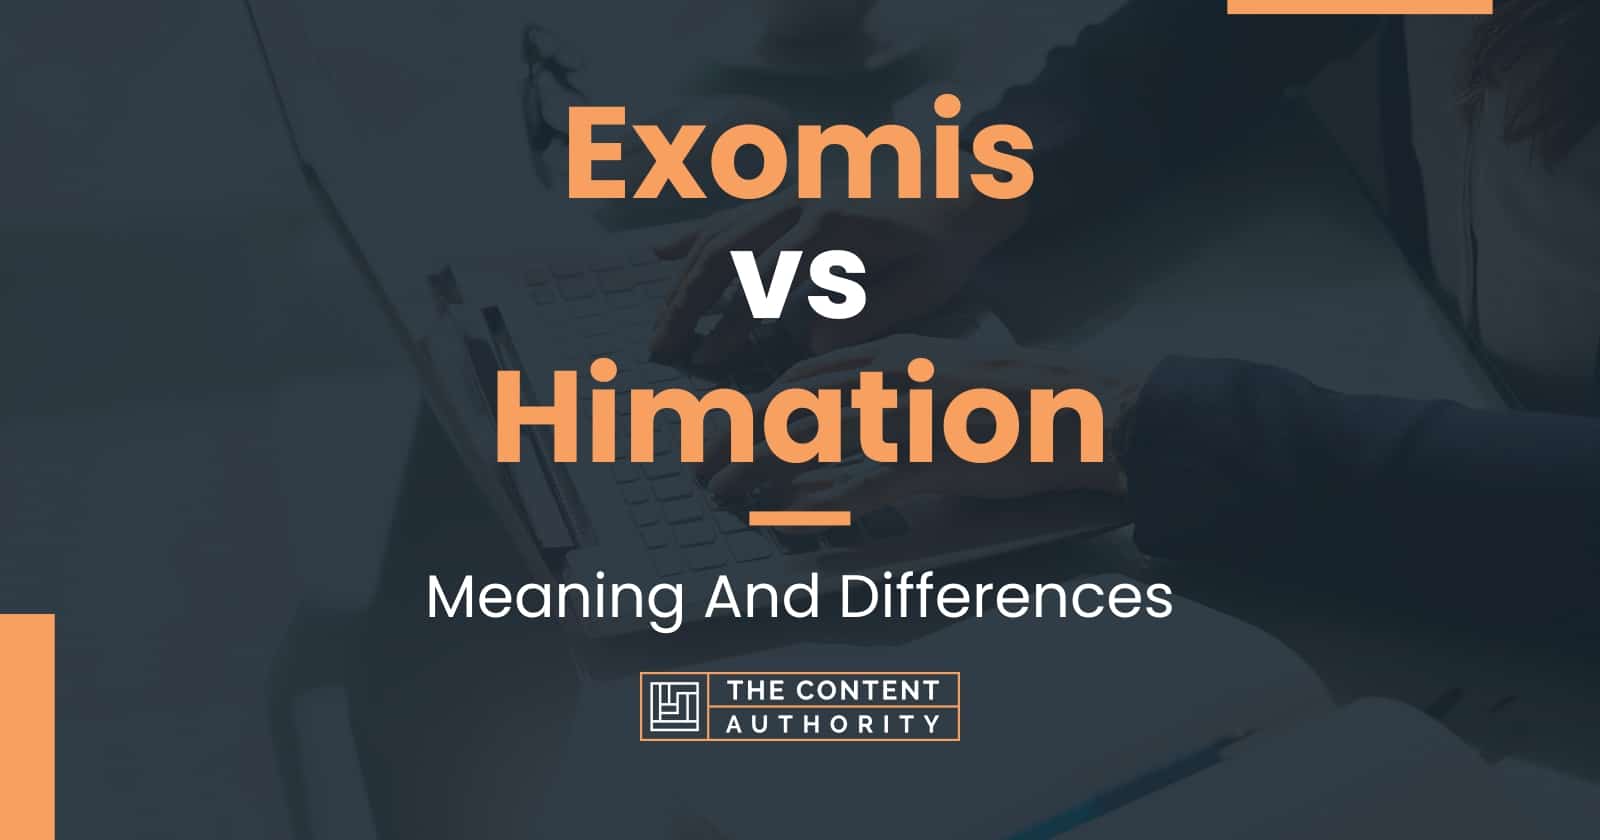 Exomis vs Himation: Meaning And Differences